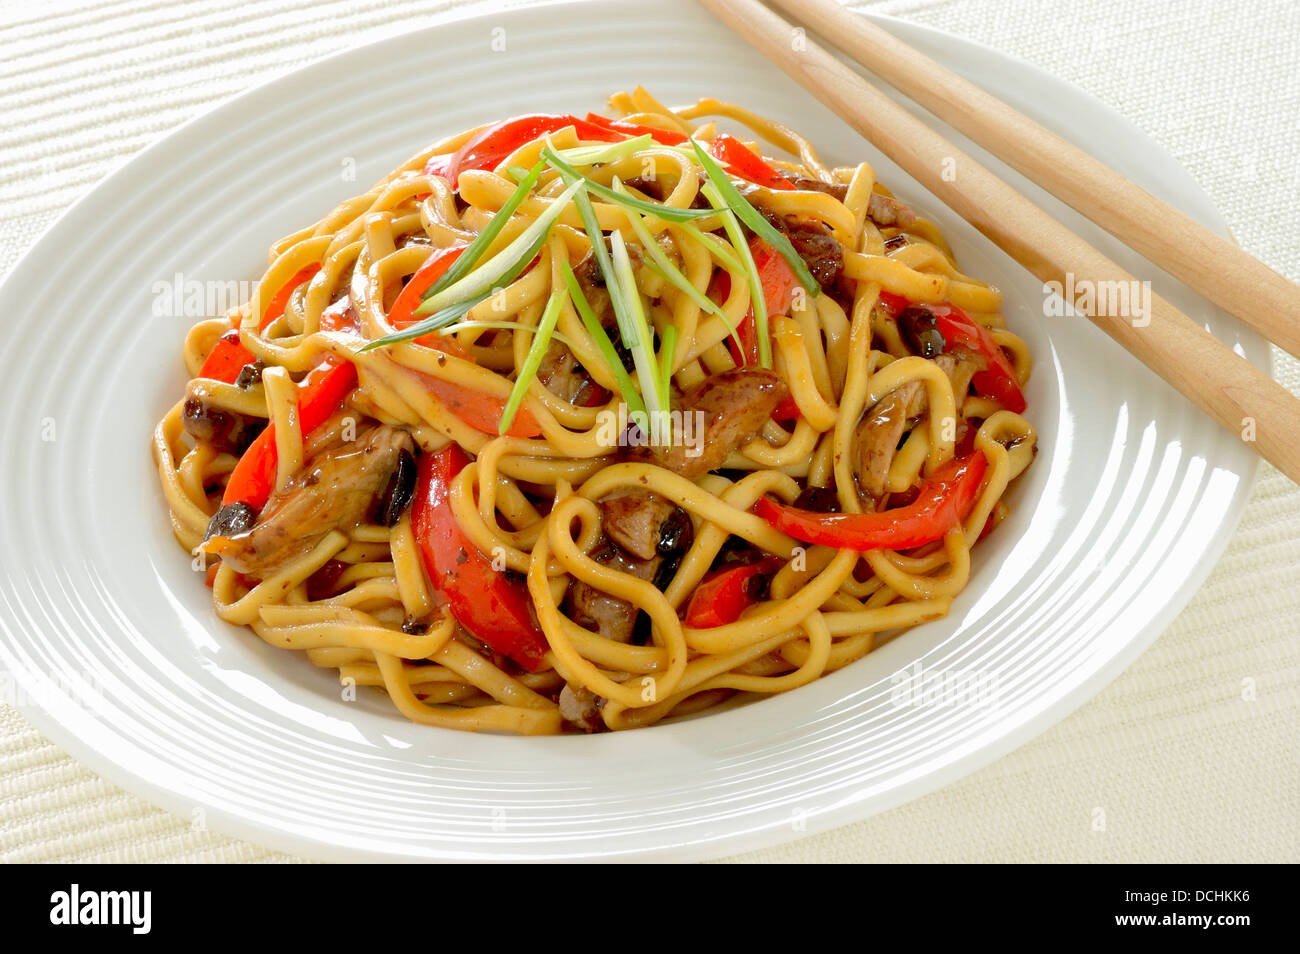 A BOWL OF NOODLES WITH BLACK BEAN SAUCE STIR FRY Stock Photo